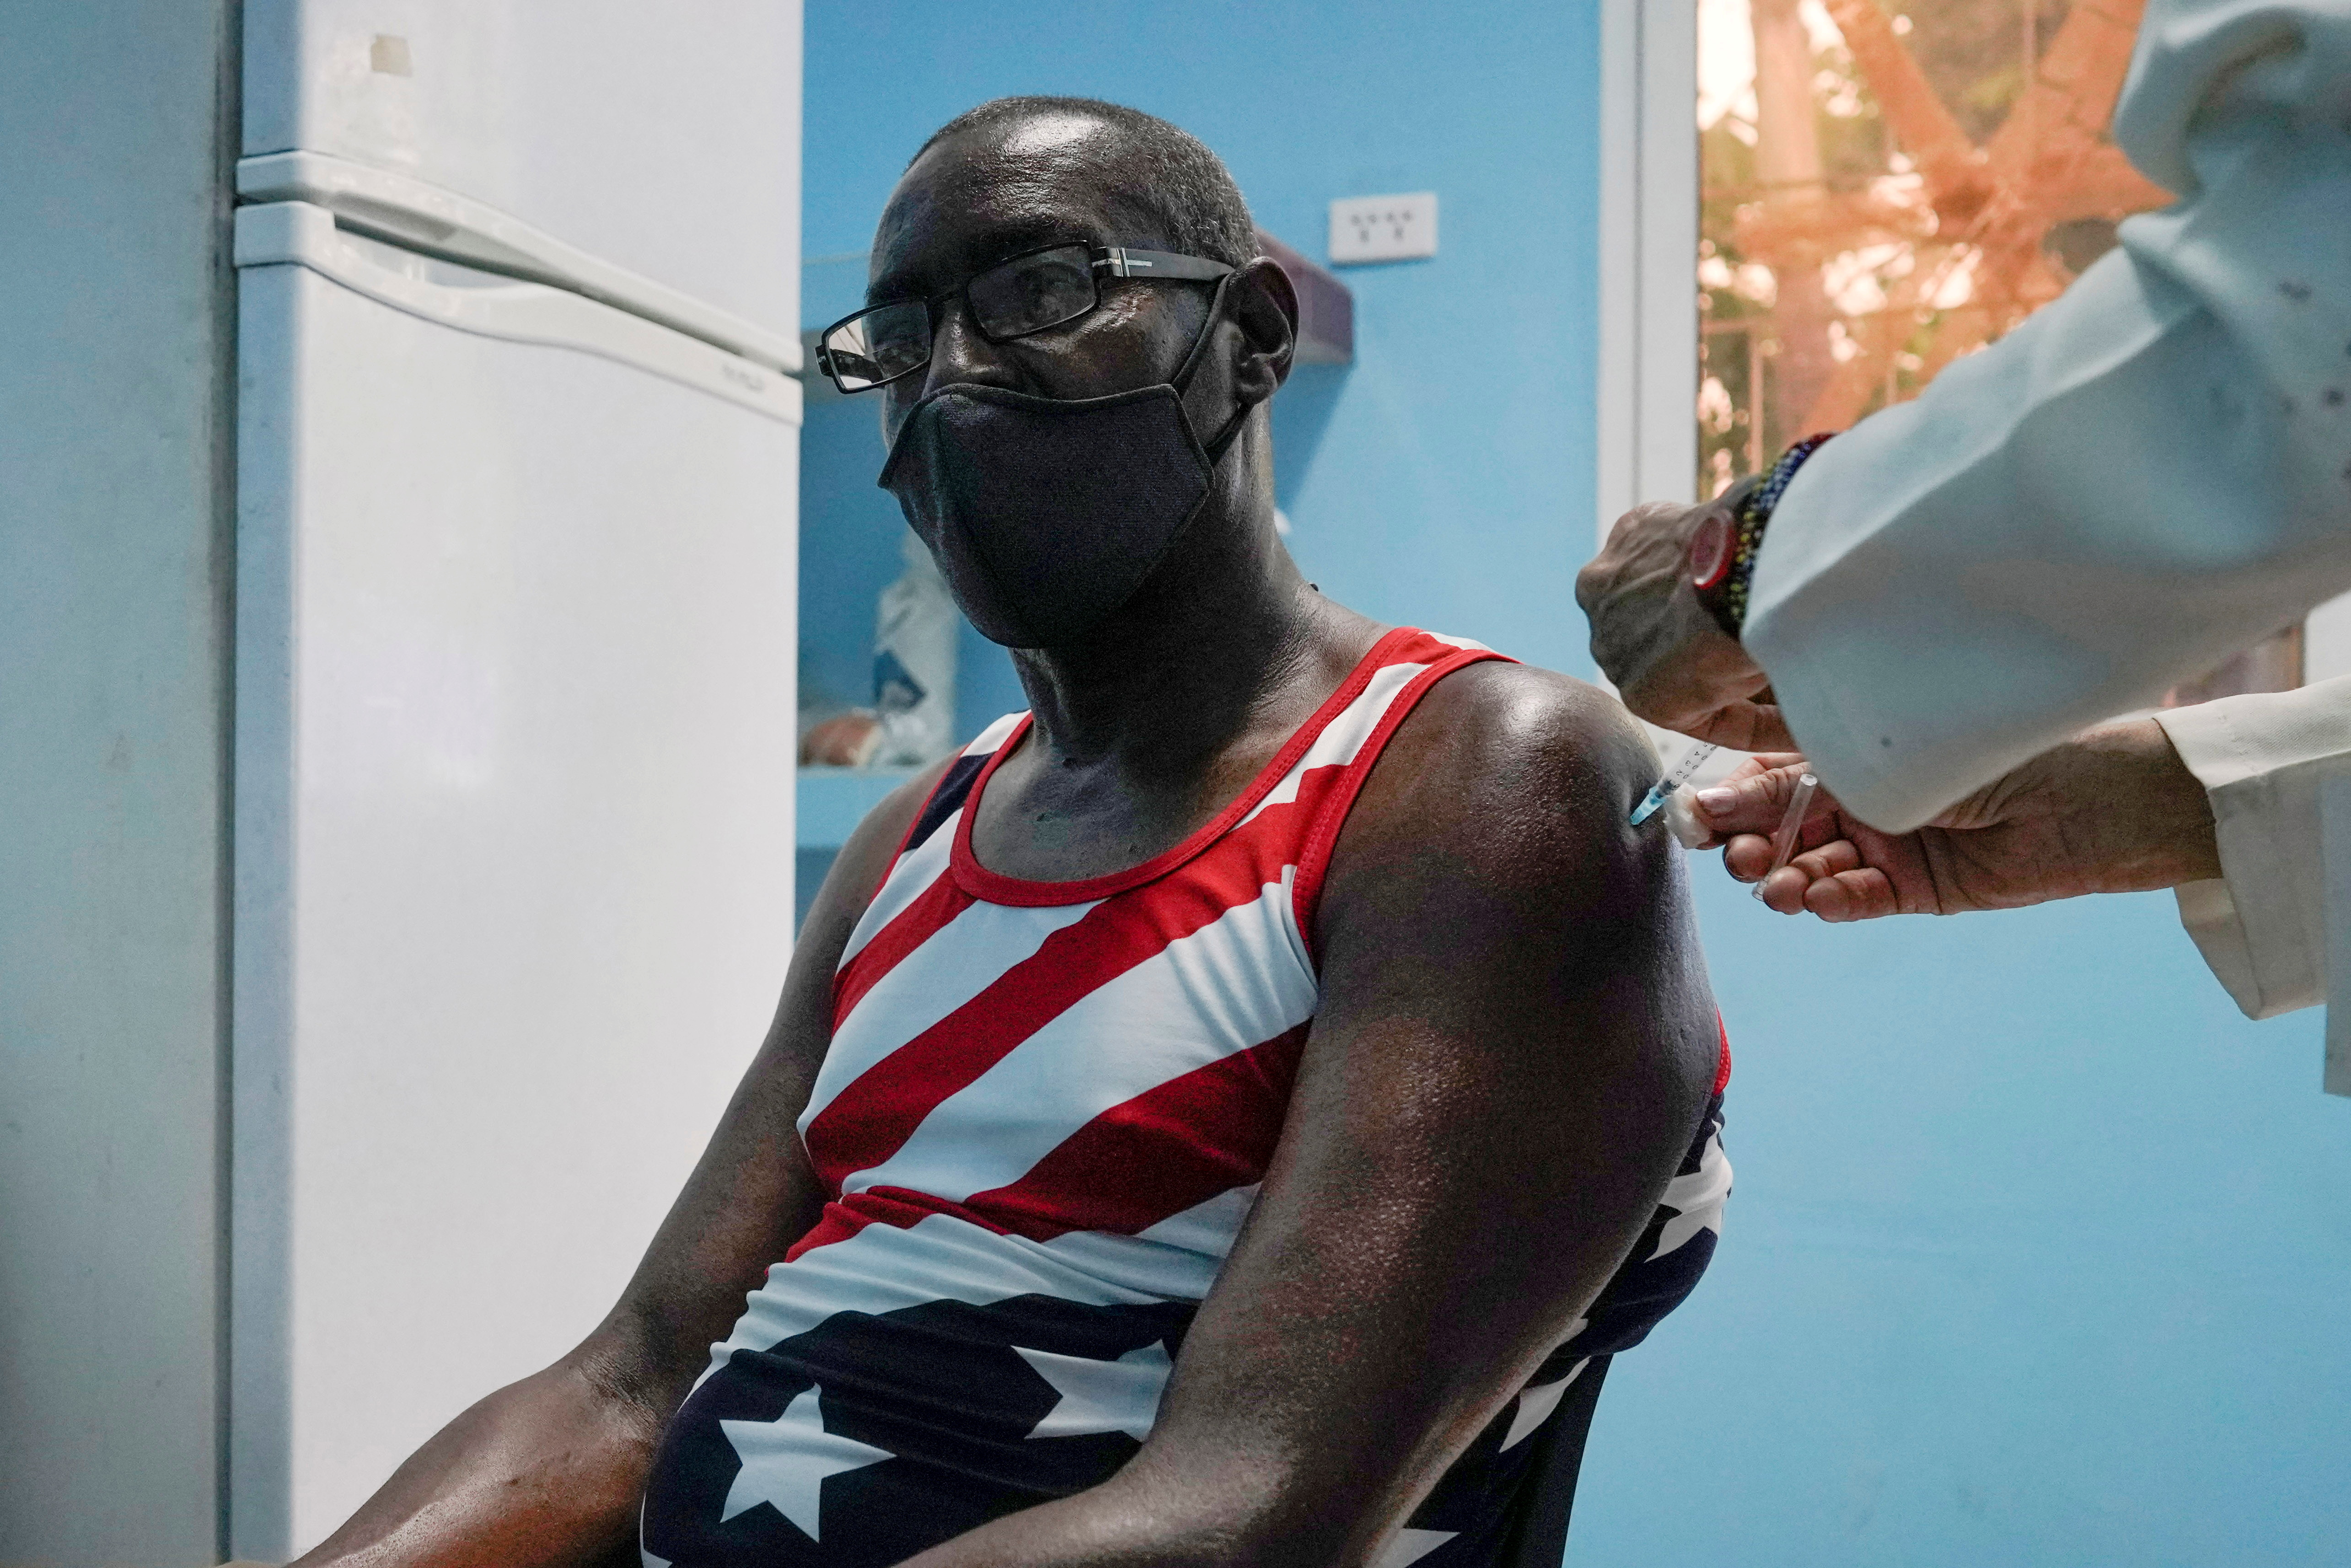 A man is vaccinated at a vaccination center amid concerns about the spread of the coronavirus disease (COVID-19) in Havana, Cuba, June 17, 2021. REUTERS/Alexandre Meneghini/File Photo